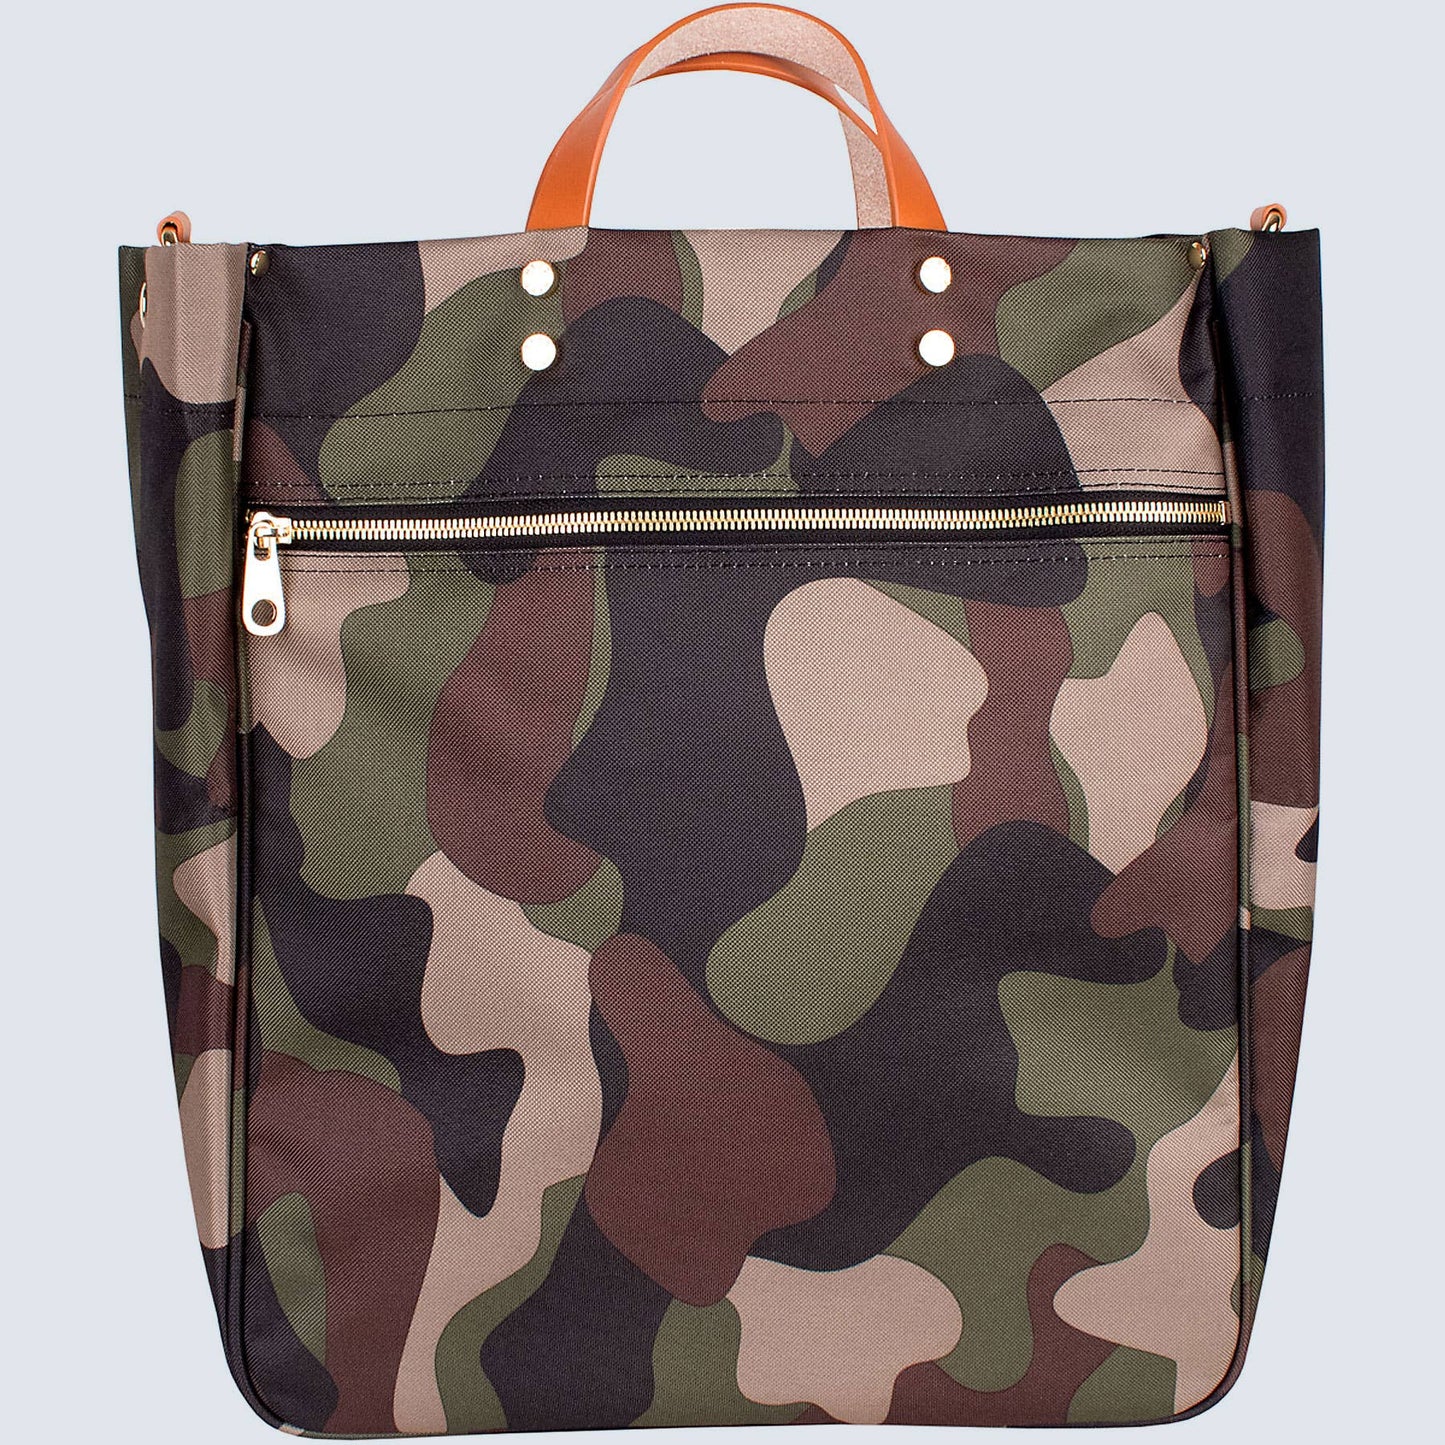 "Parker" Camo Nylon Tote with Leather Accents Purses + Totes Boulevard   